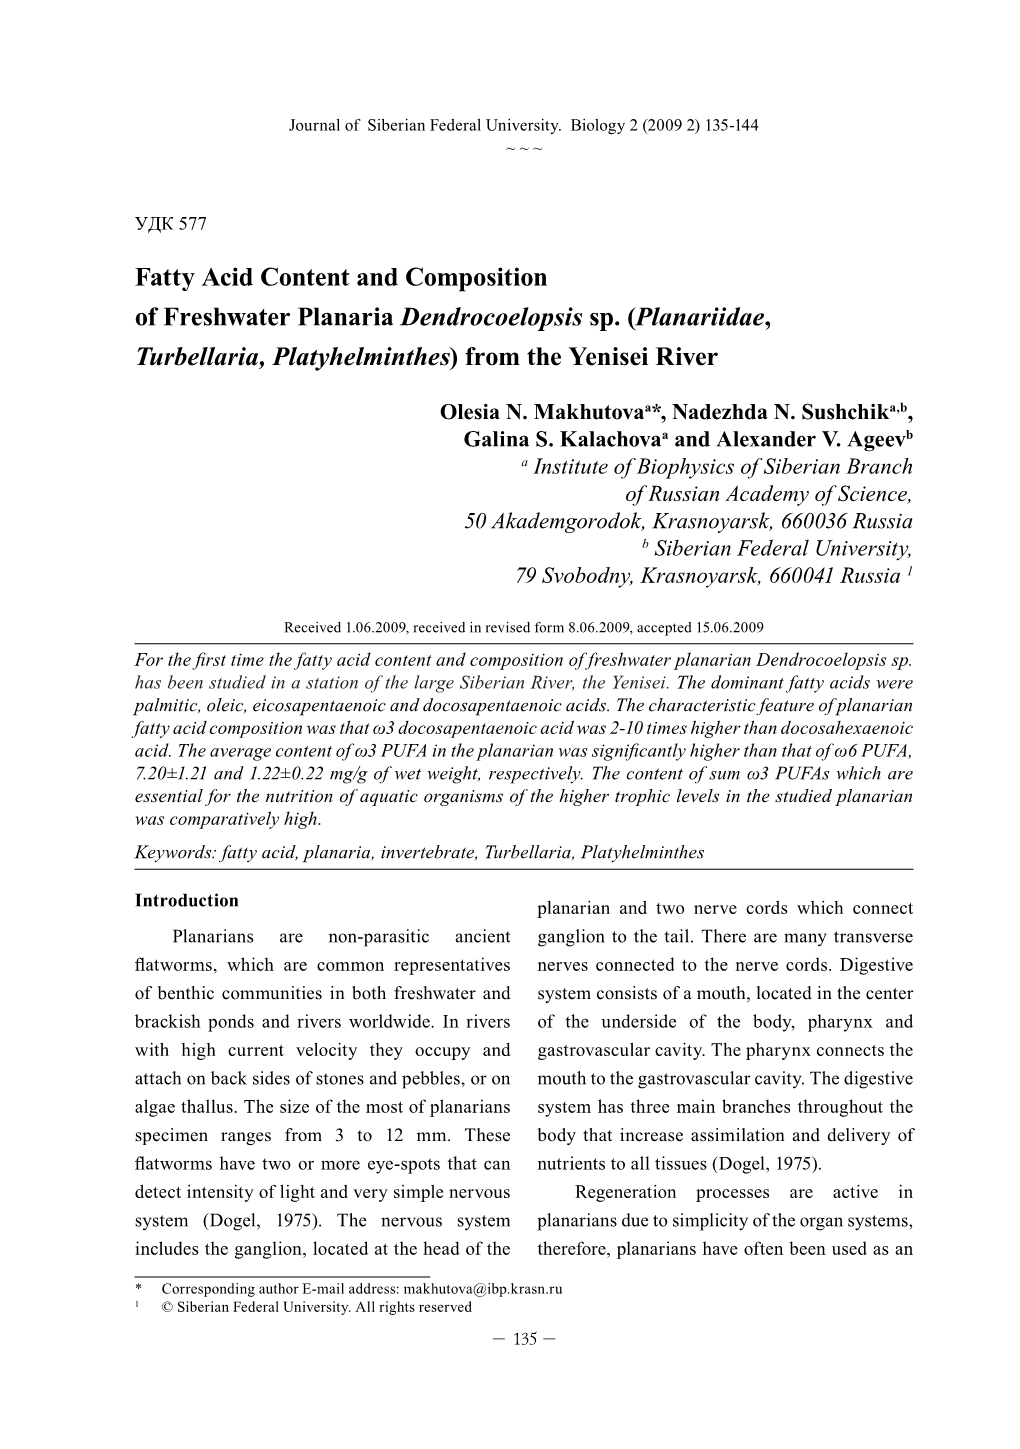 Fatty Acid Content and Composition of Freshwater Planaria Dendrocoelopsis Sp